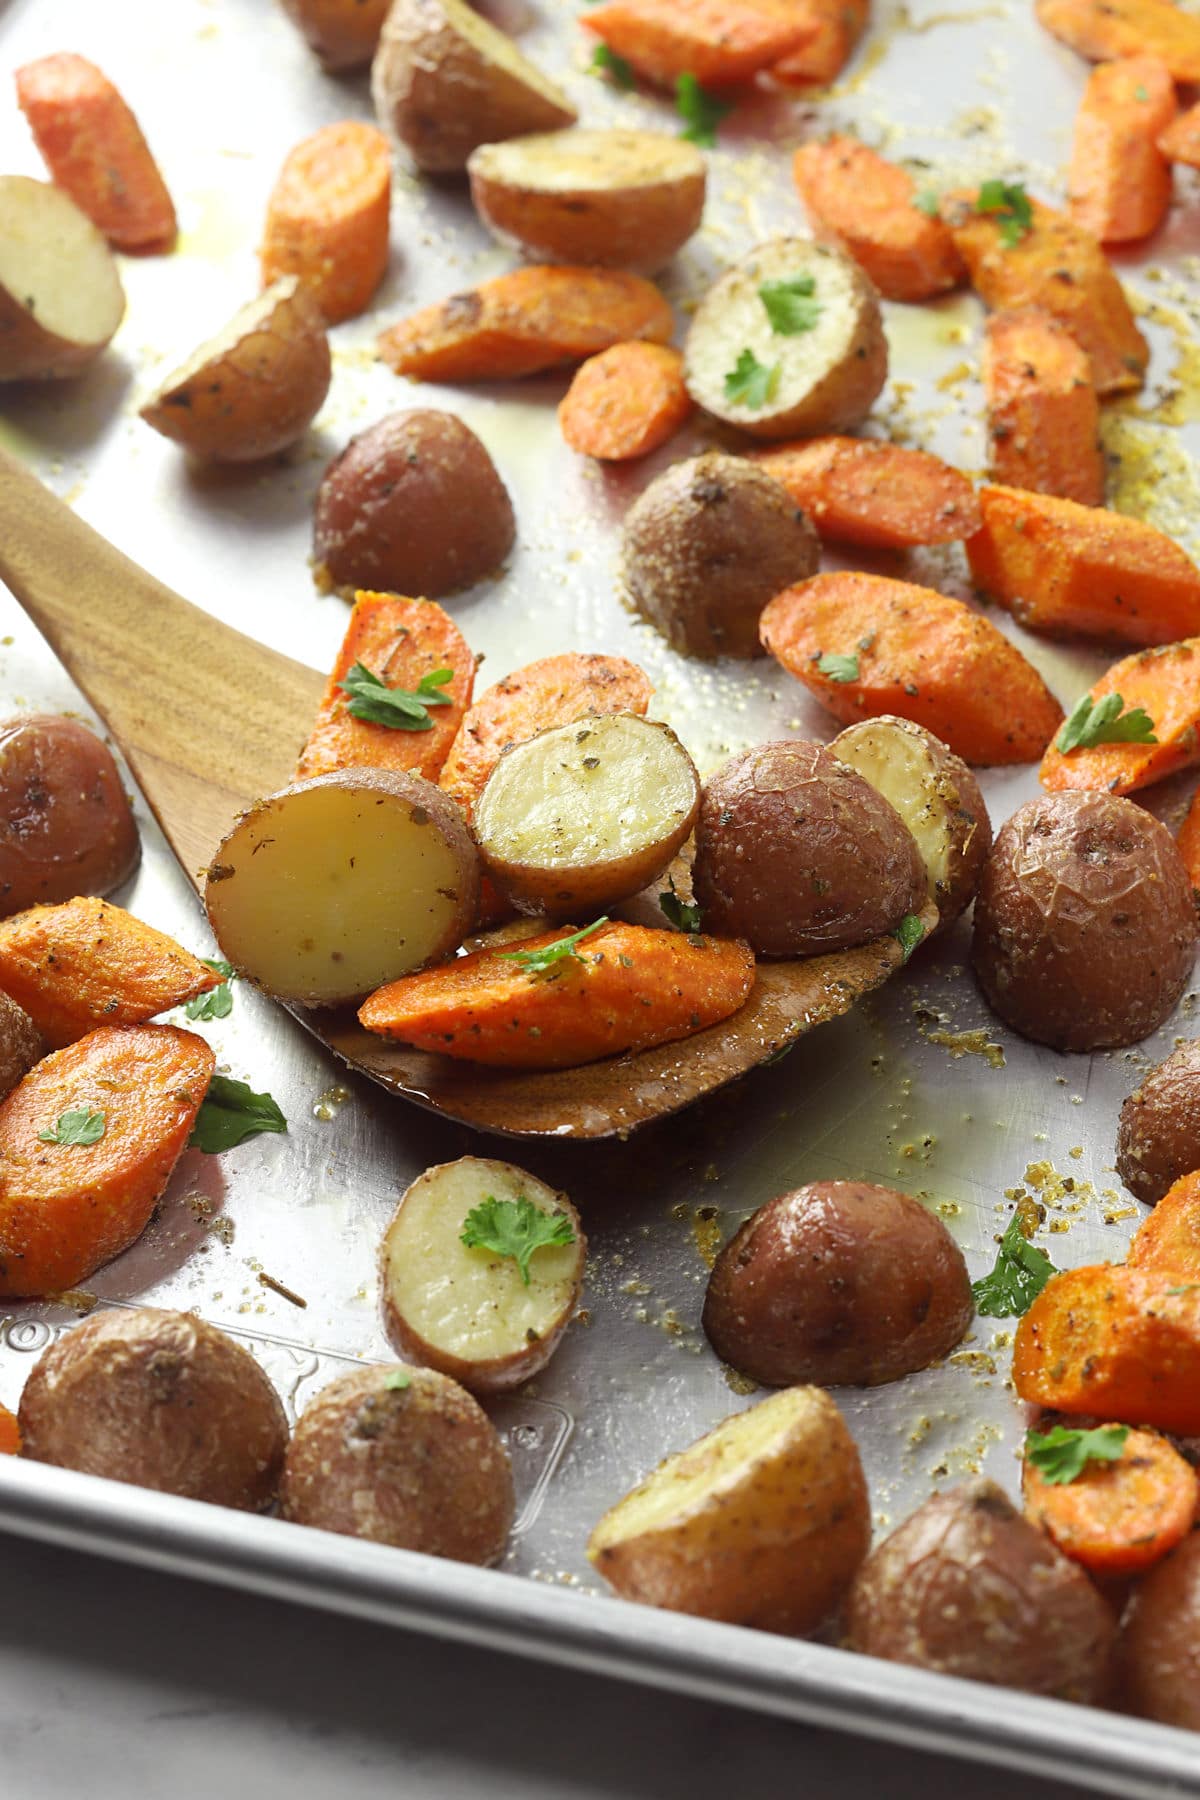 Wooden spatula scooping potatoes and carrots from a metal sheet pan.